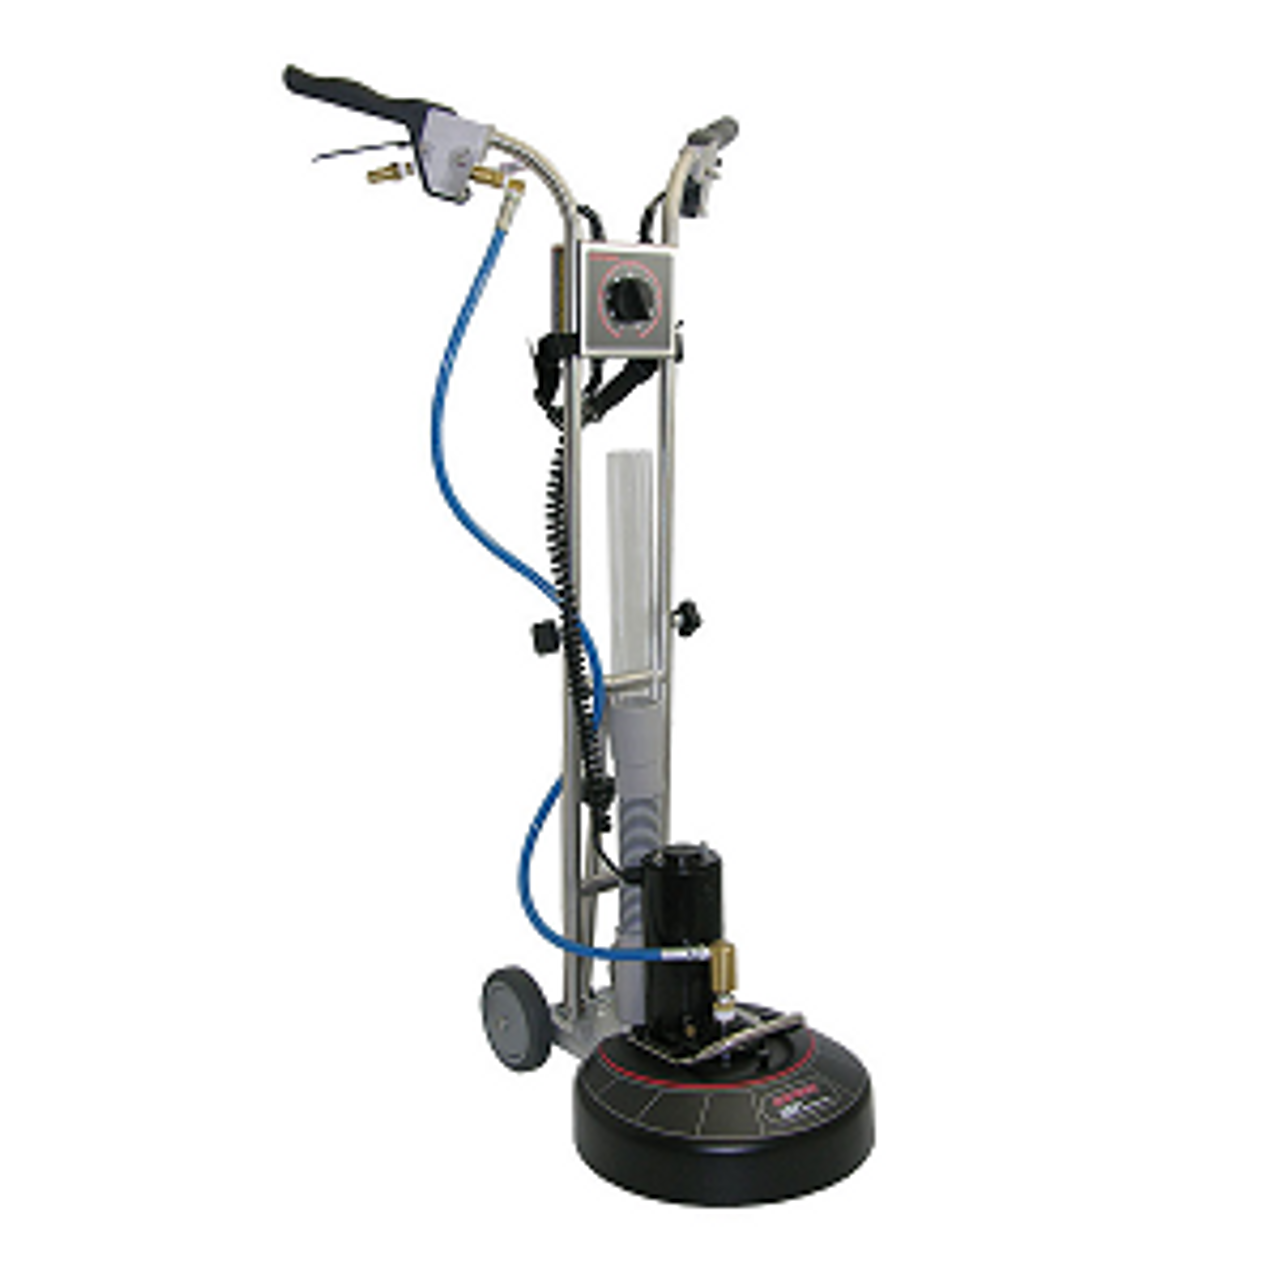 Rotovac 360i - Professional Tile & Grout Cleaning Machines from Rotovac.